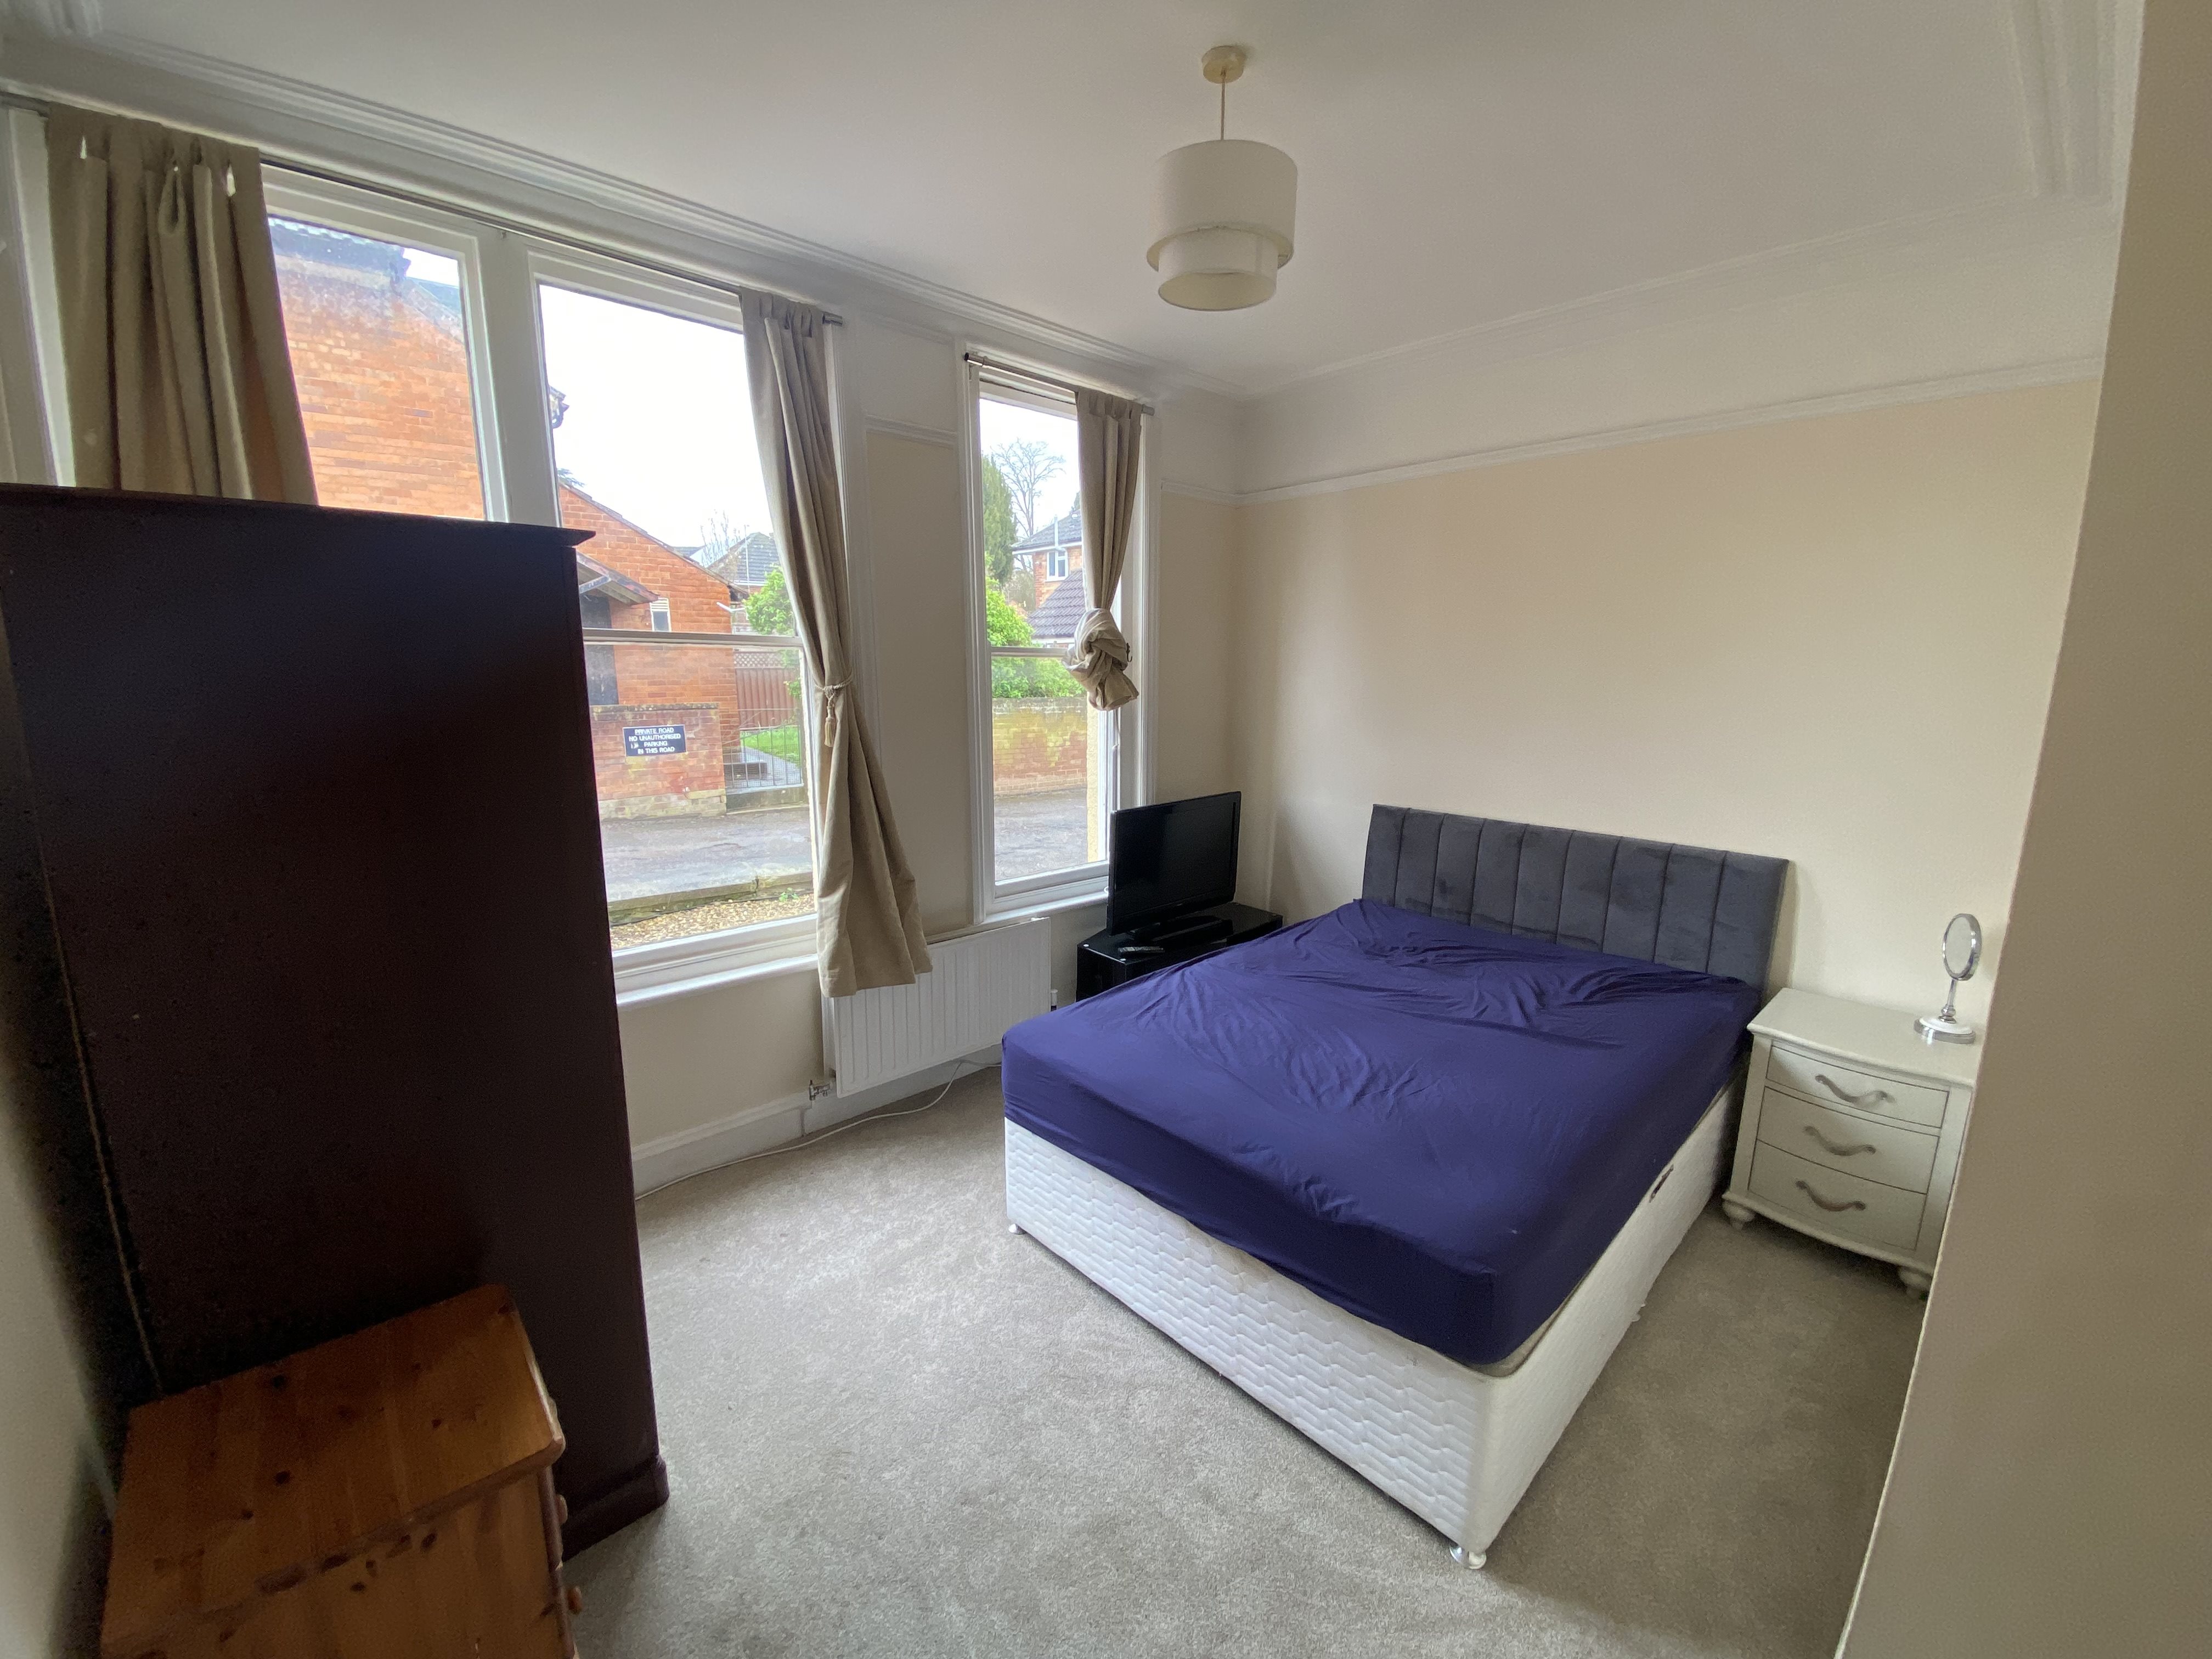 1 bed house / flat share to rent in Belvedere Road 0